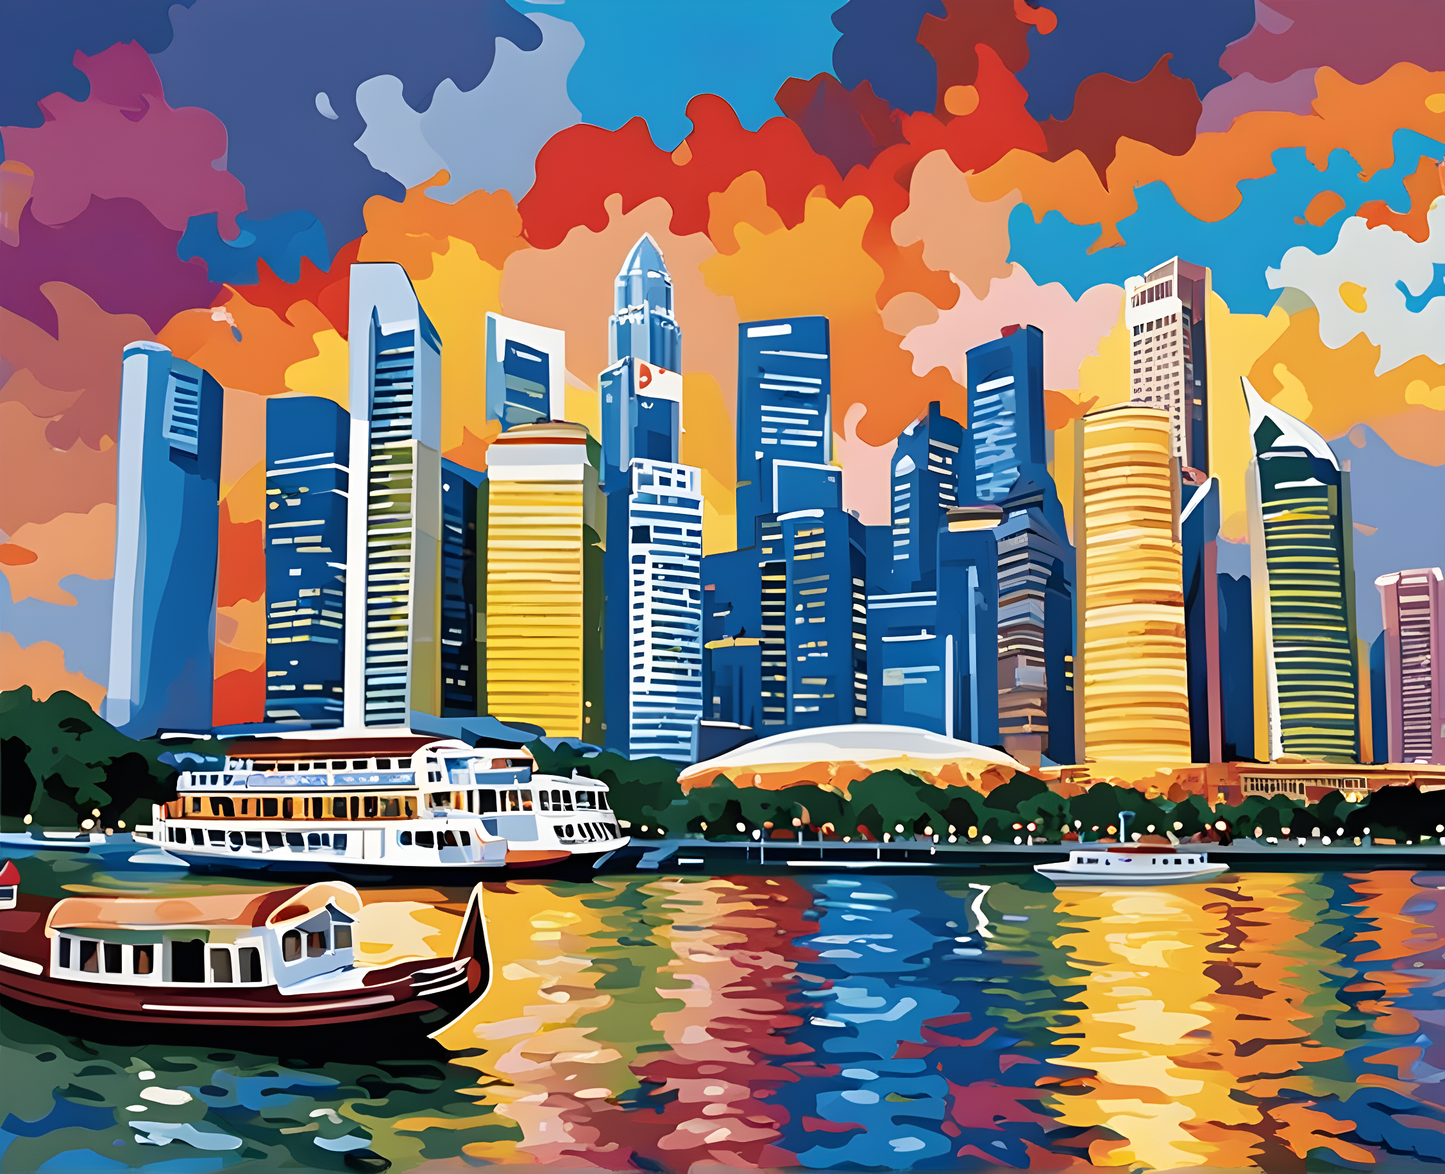 Singapore Collection OD (11) - Singapore Skyline - Van-Go Paint-By-Number Kit